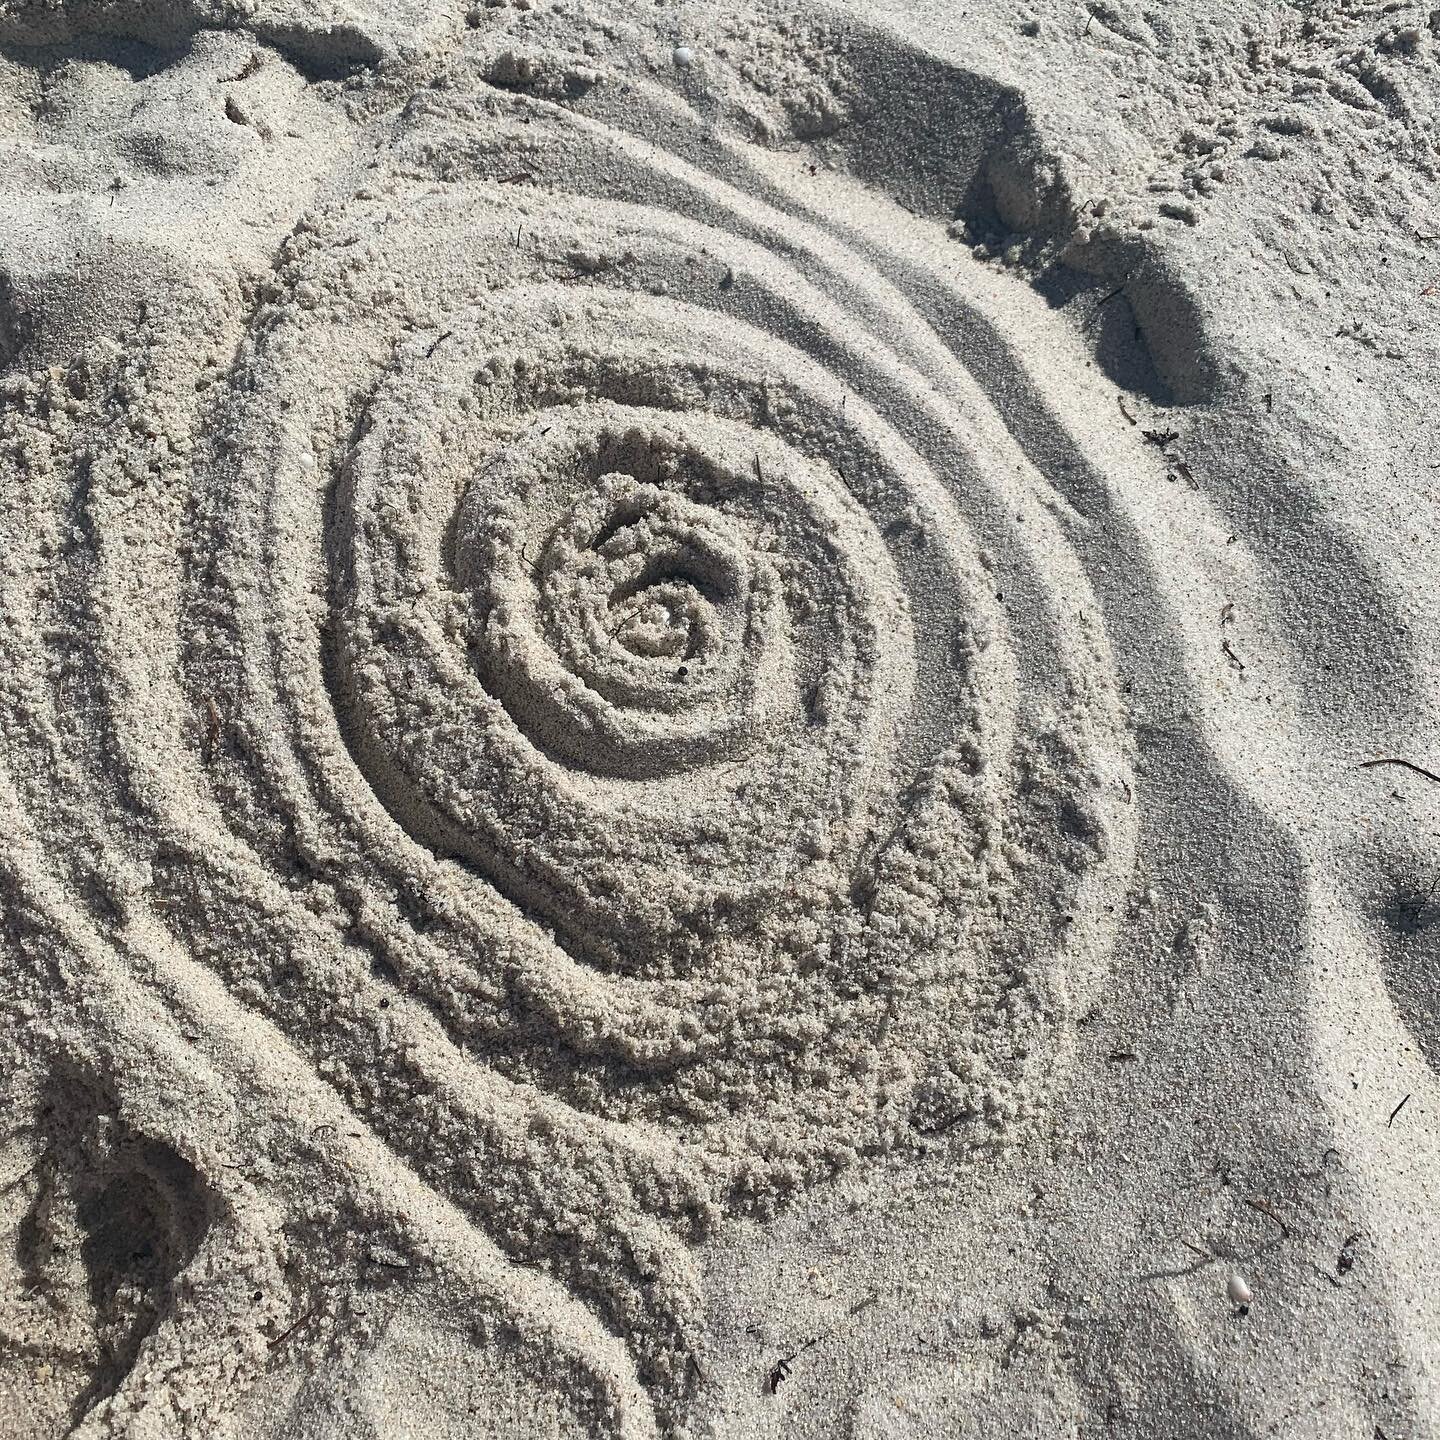 I created a Sand Yoni at the beach today 🌊

But don&rsquo;t get sand in your Yoni! 😜

Just a reminder, I&rsquo;ll be closed for two weeks to quarantine/get tested for COVID and then will be resuming usual hours! 

#medicalintuitive #holisticapproac